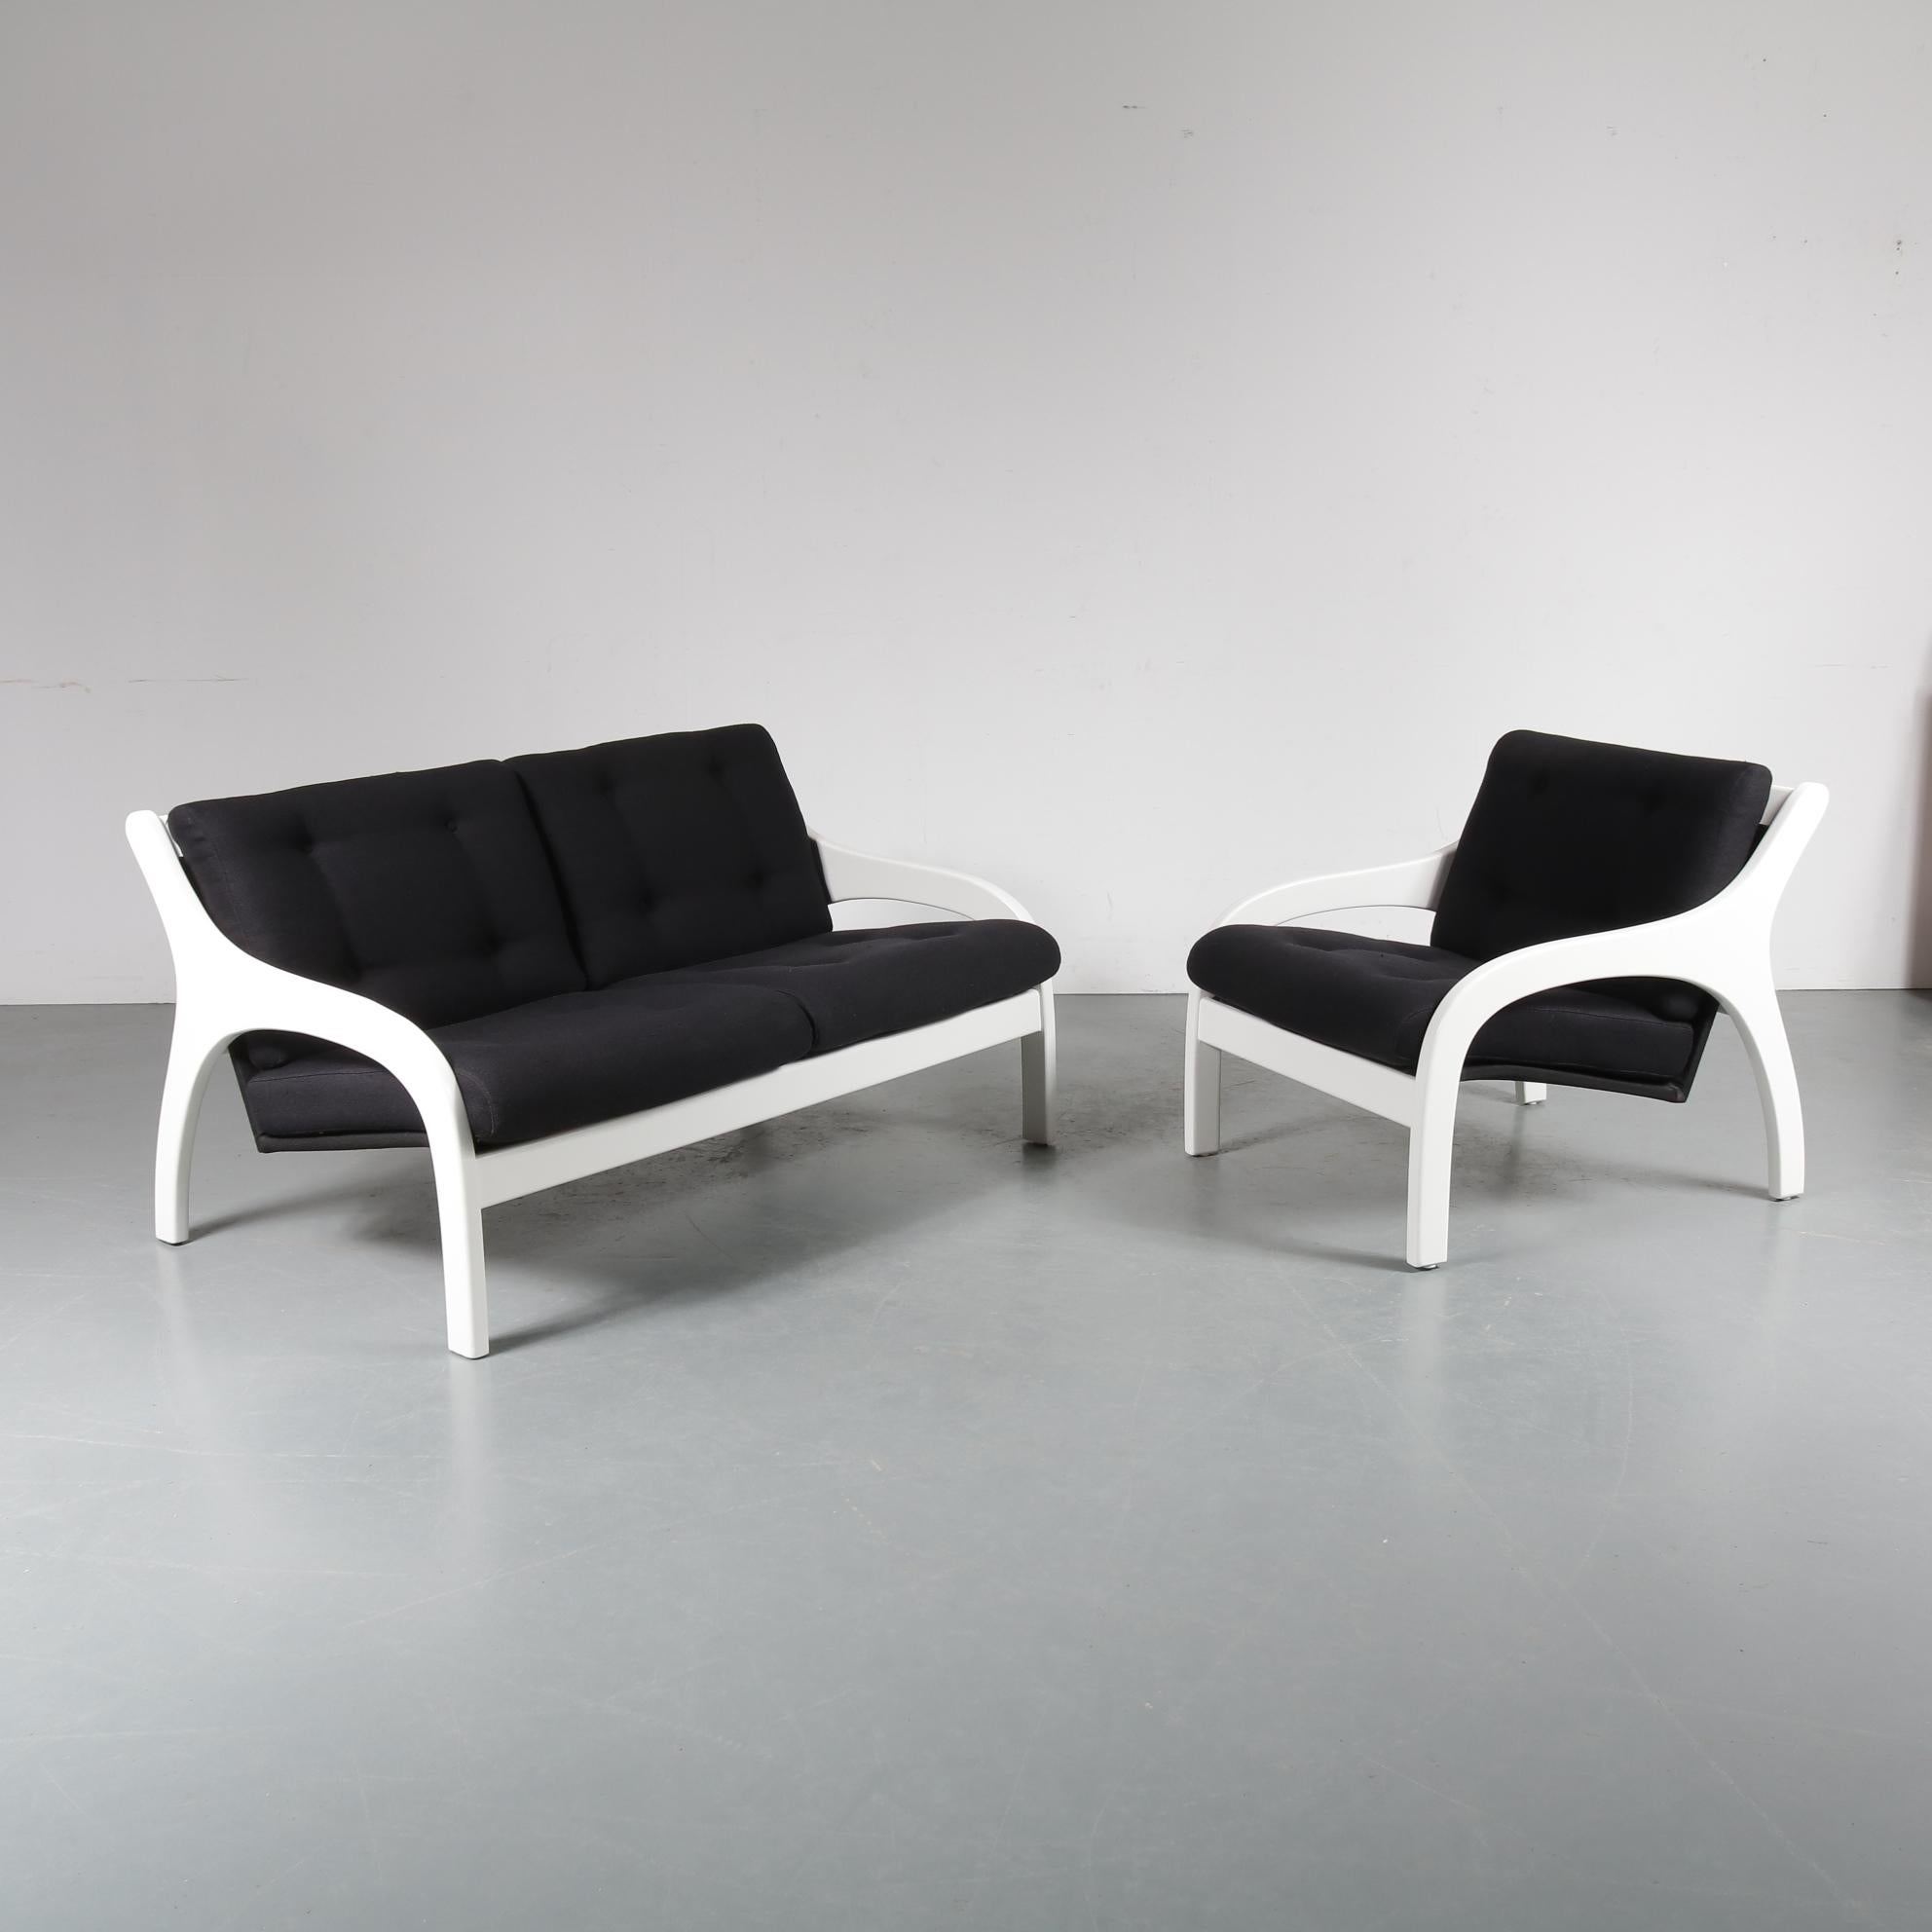 A beautiful and rare seating set, a two-seater sofa and lounge chair, model 